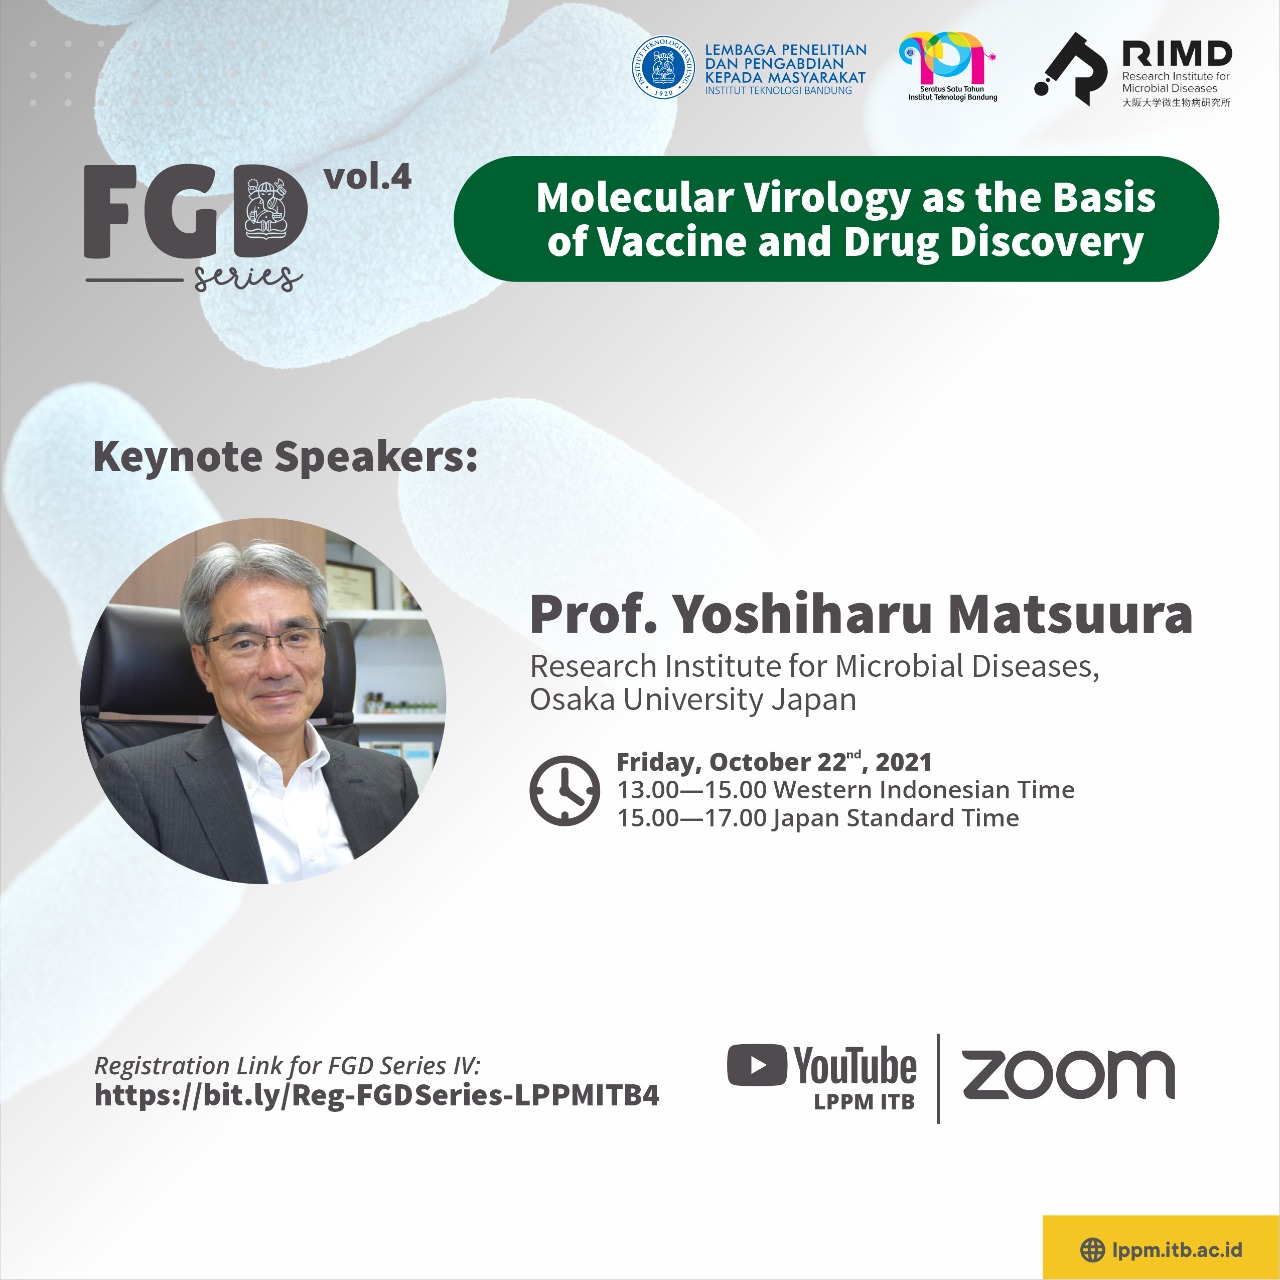 Focus Group Discussion LPPM ITB Vol IV “Molecular Virology as The Basis of Vaccine and Drug Discovery”